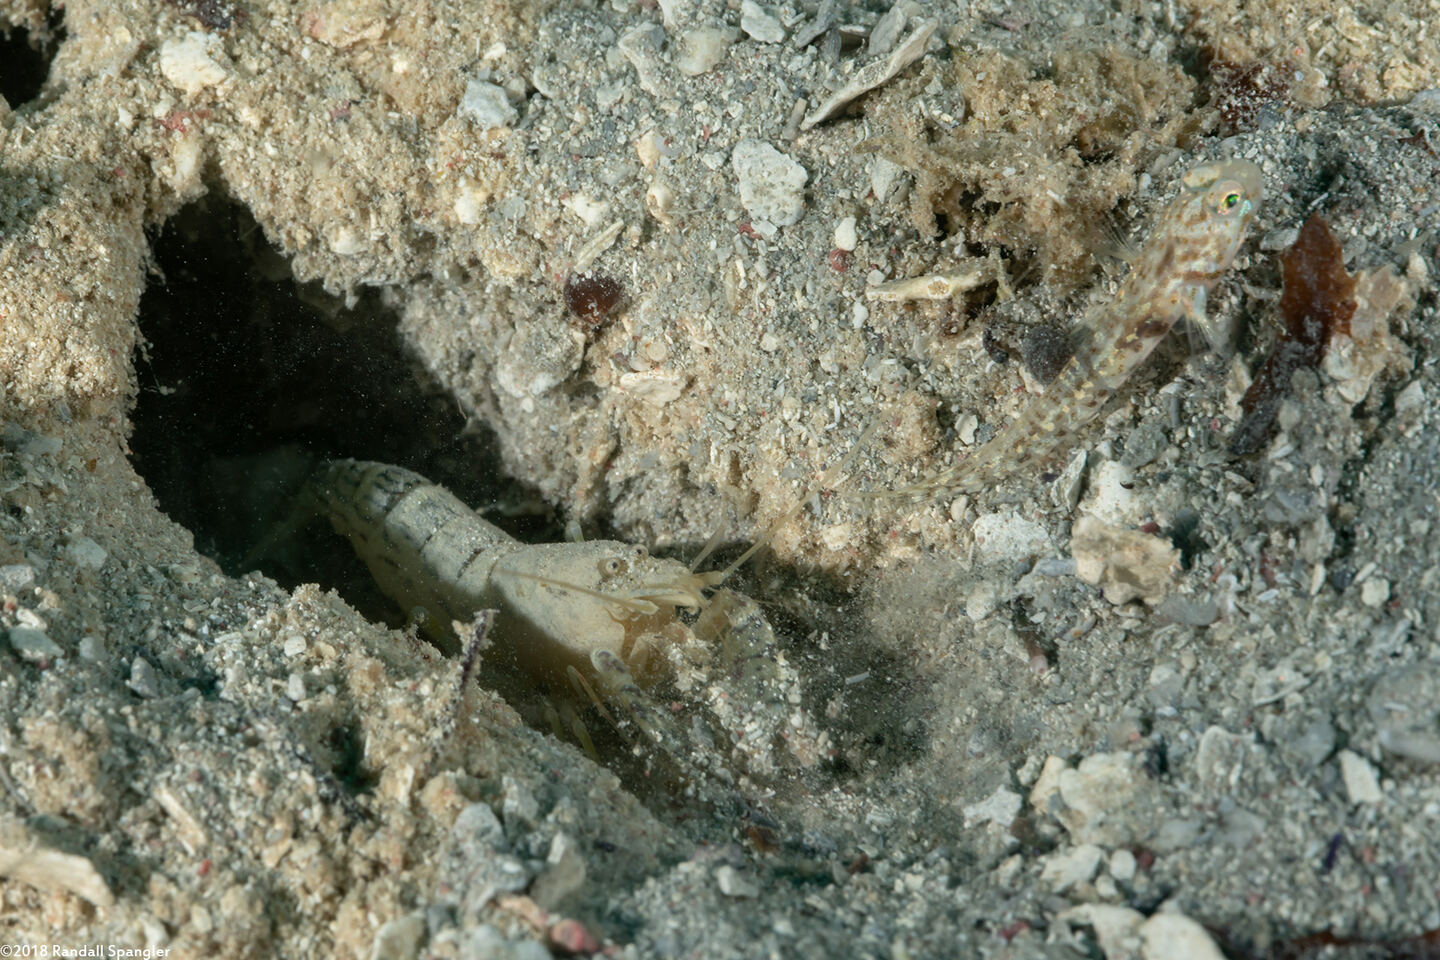 Alpheus cf. floridanus (Sand Snapping Shrimp); With sand snapping shrimp